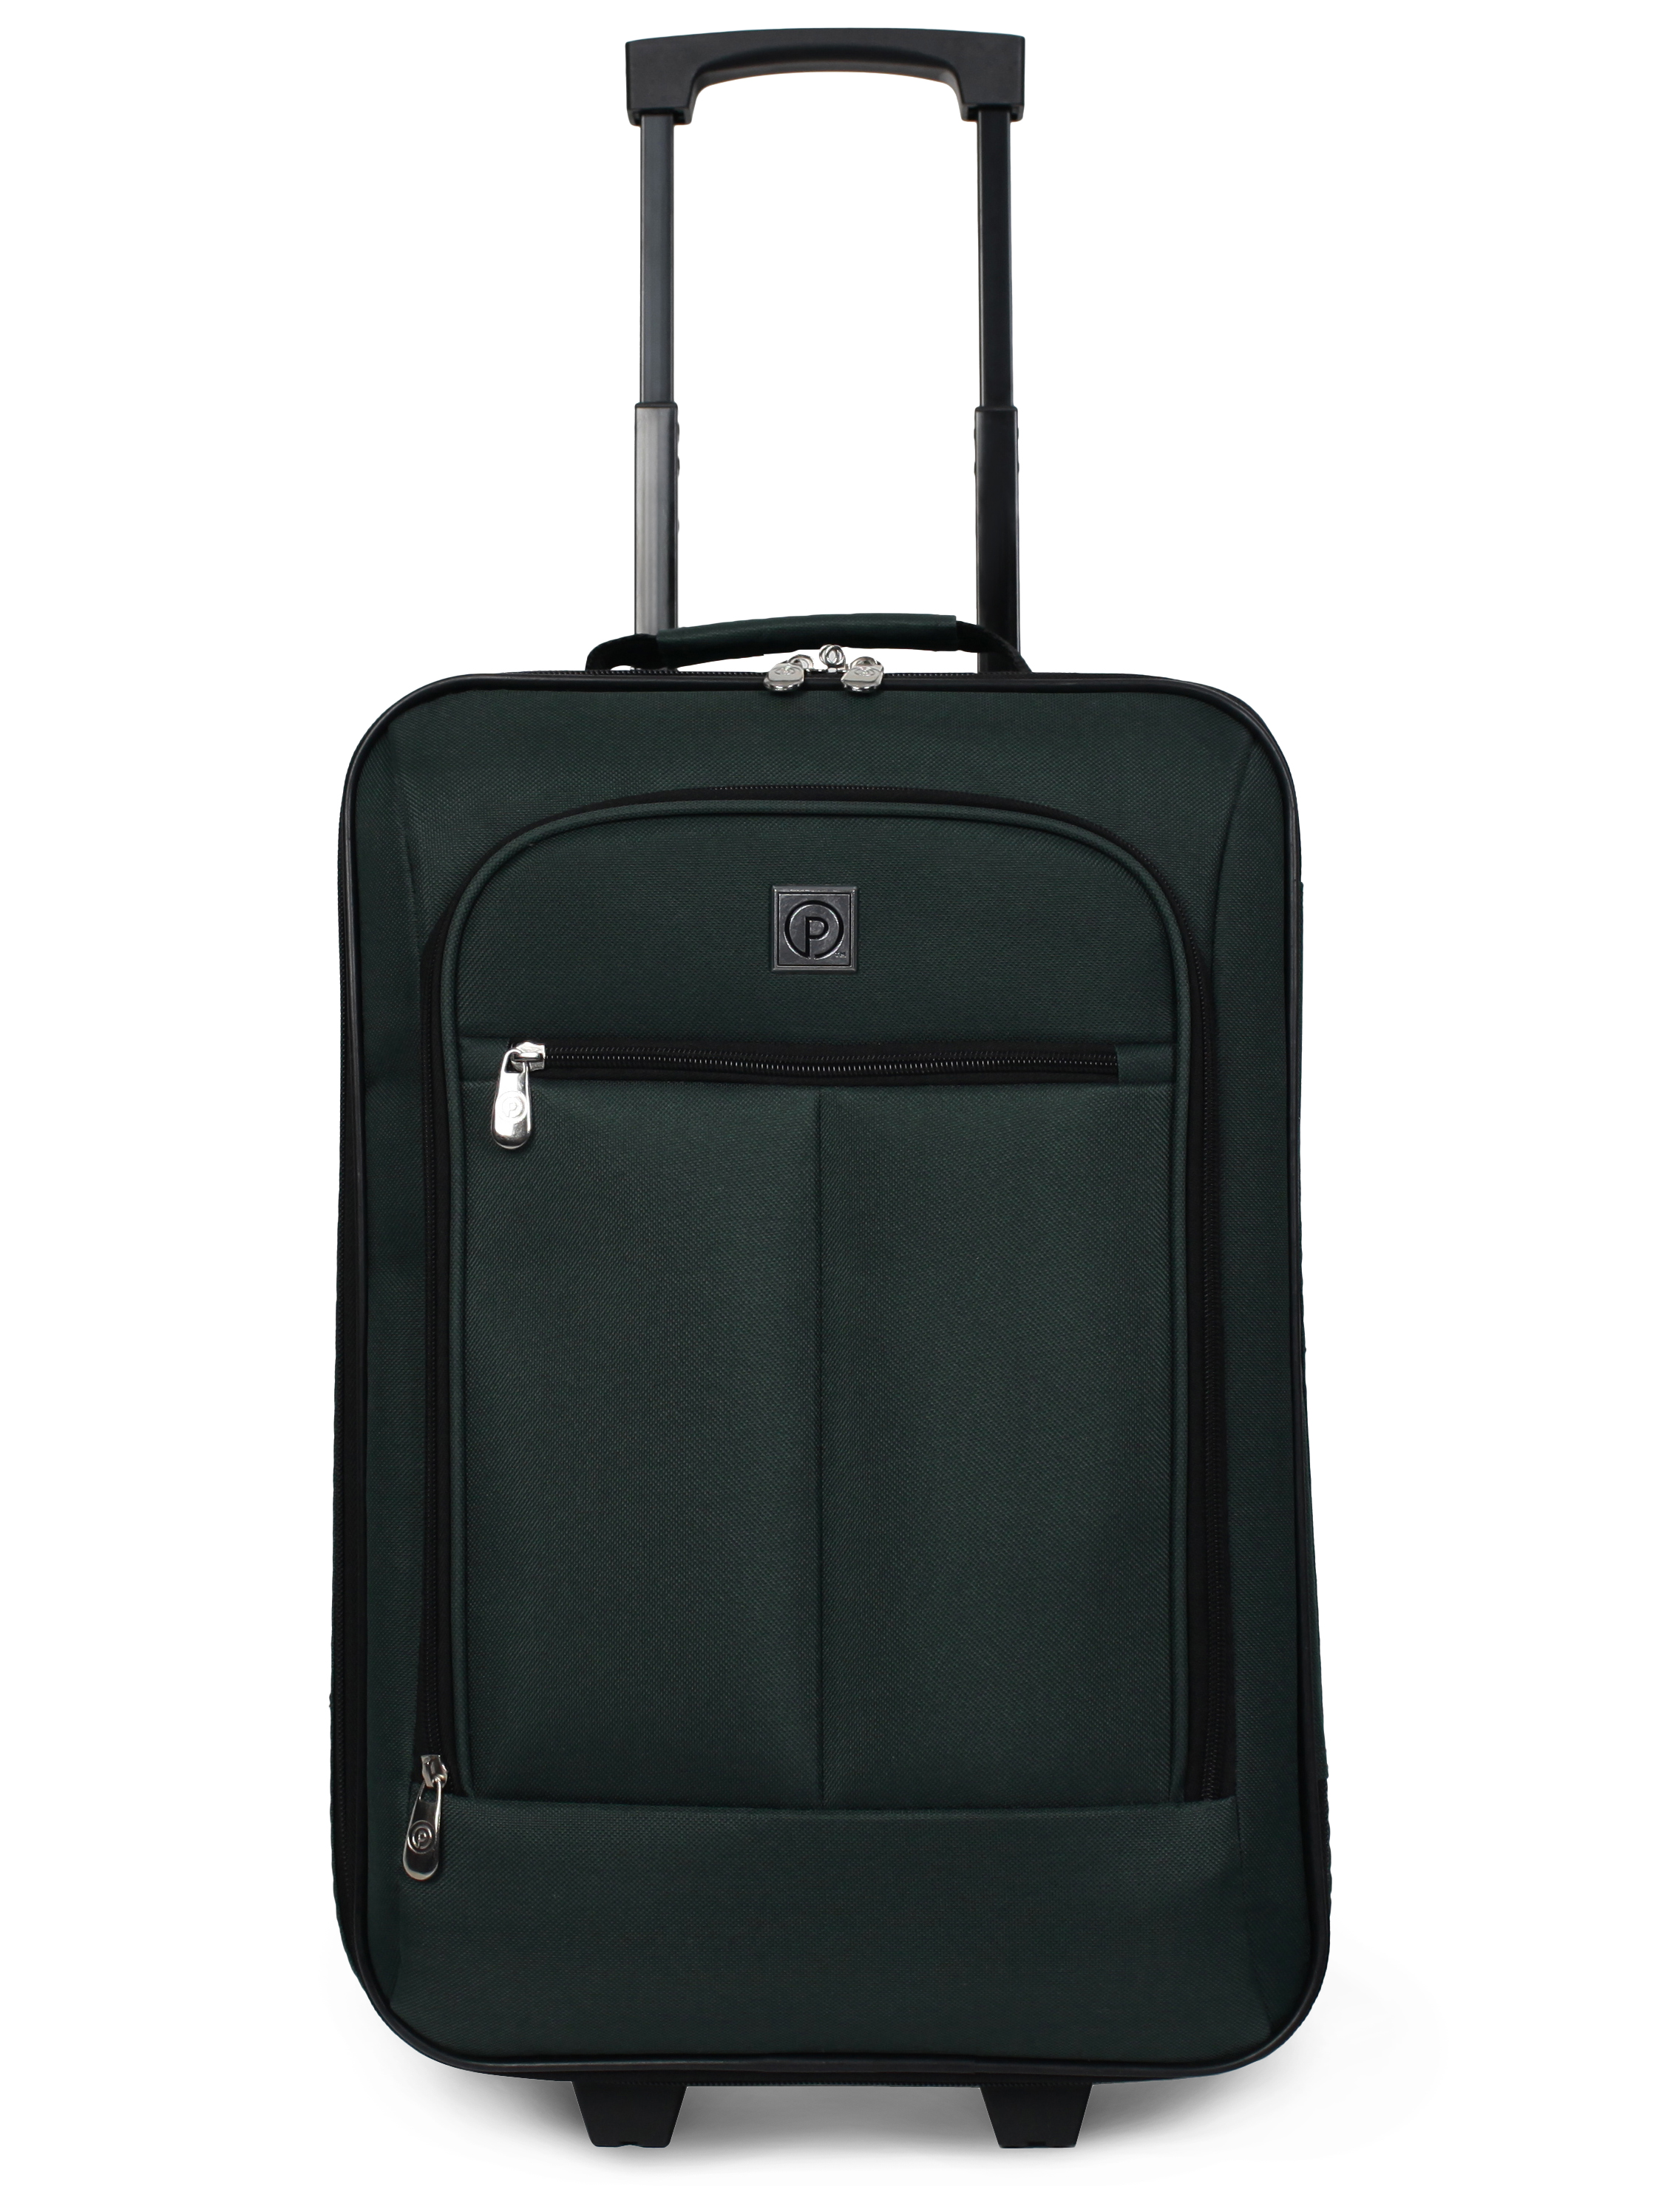 Protege Pilot Case 18" Softside Carry-on Luggage, Green - image 1 of 7